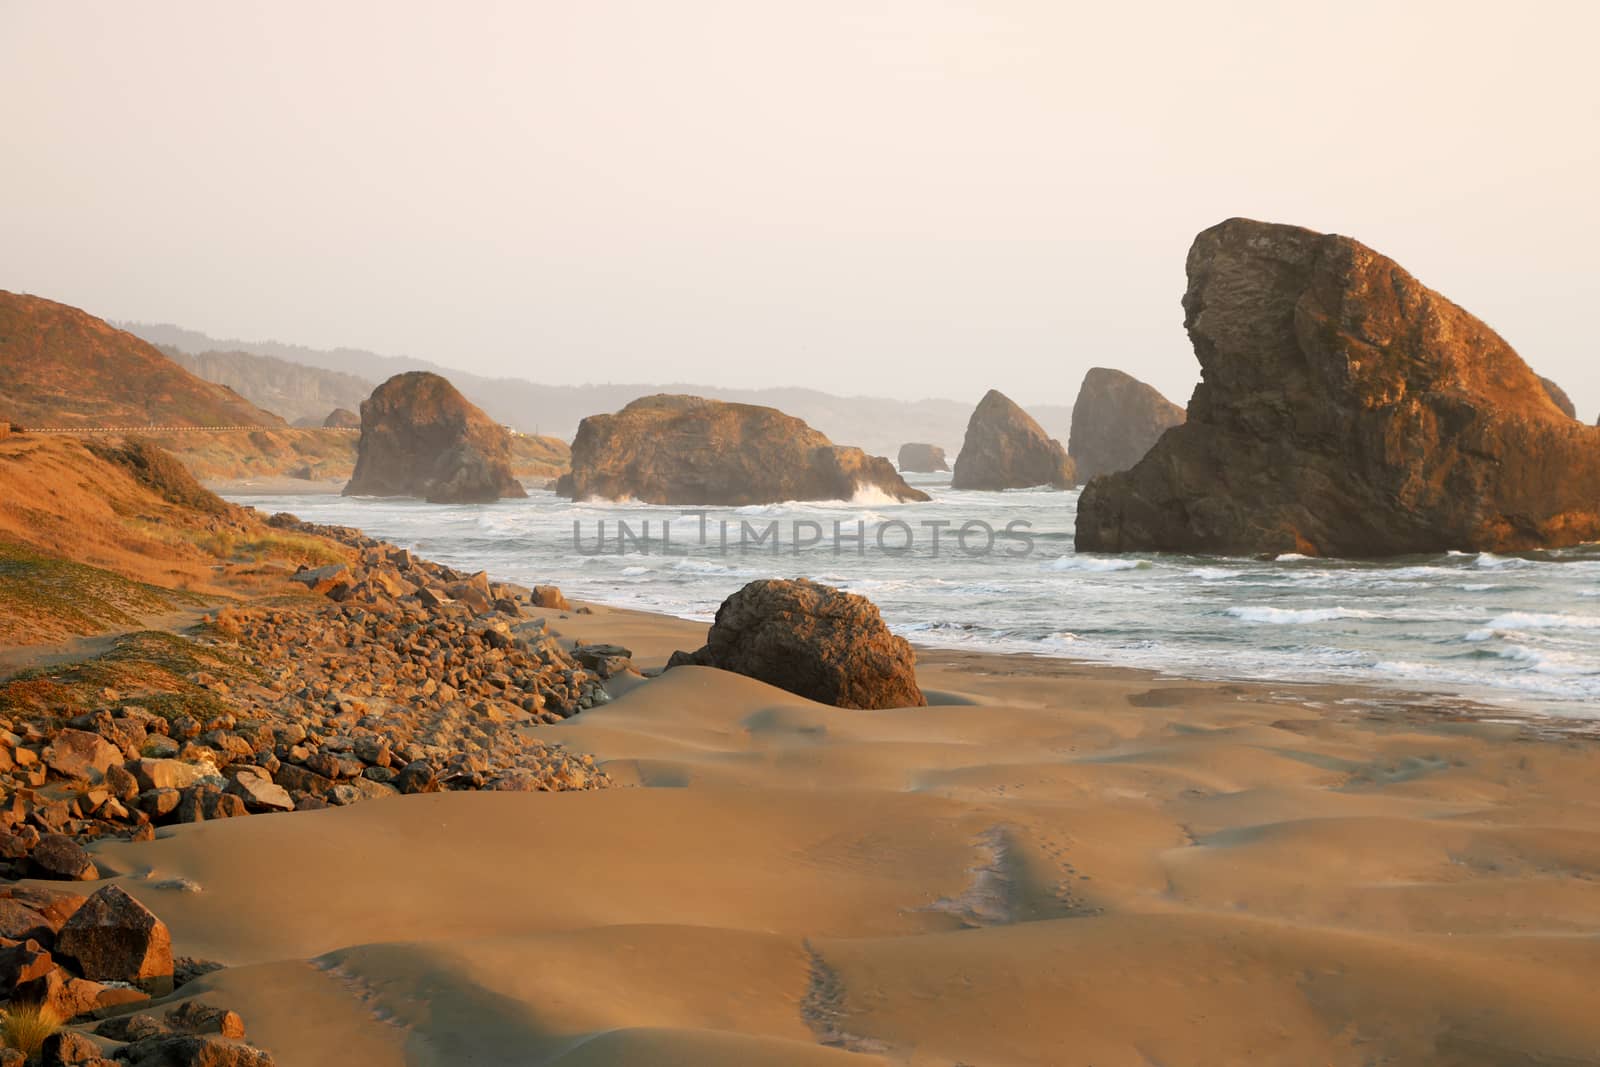 View of the sandy beach and rocks during sunset in the Pacific Ocean.